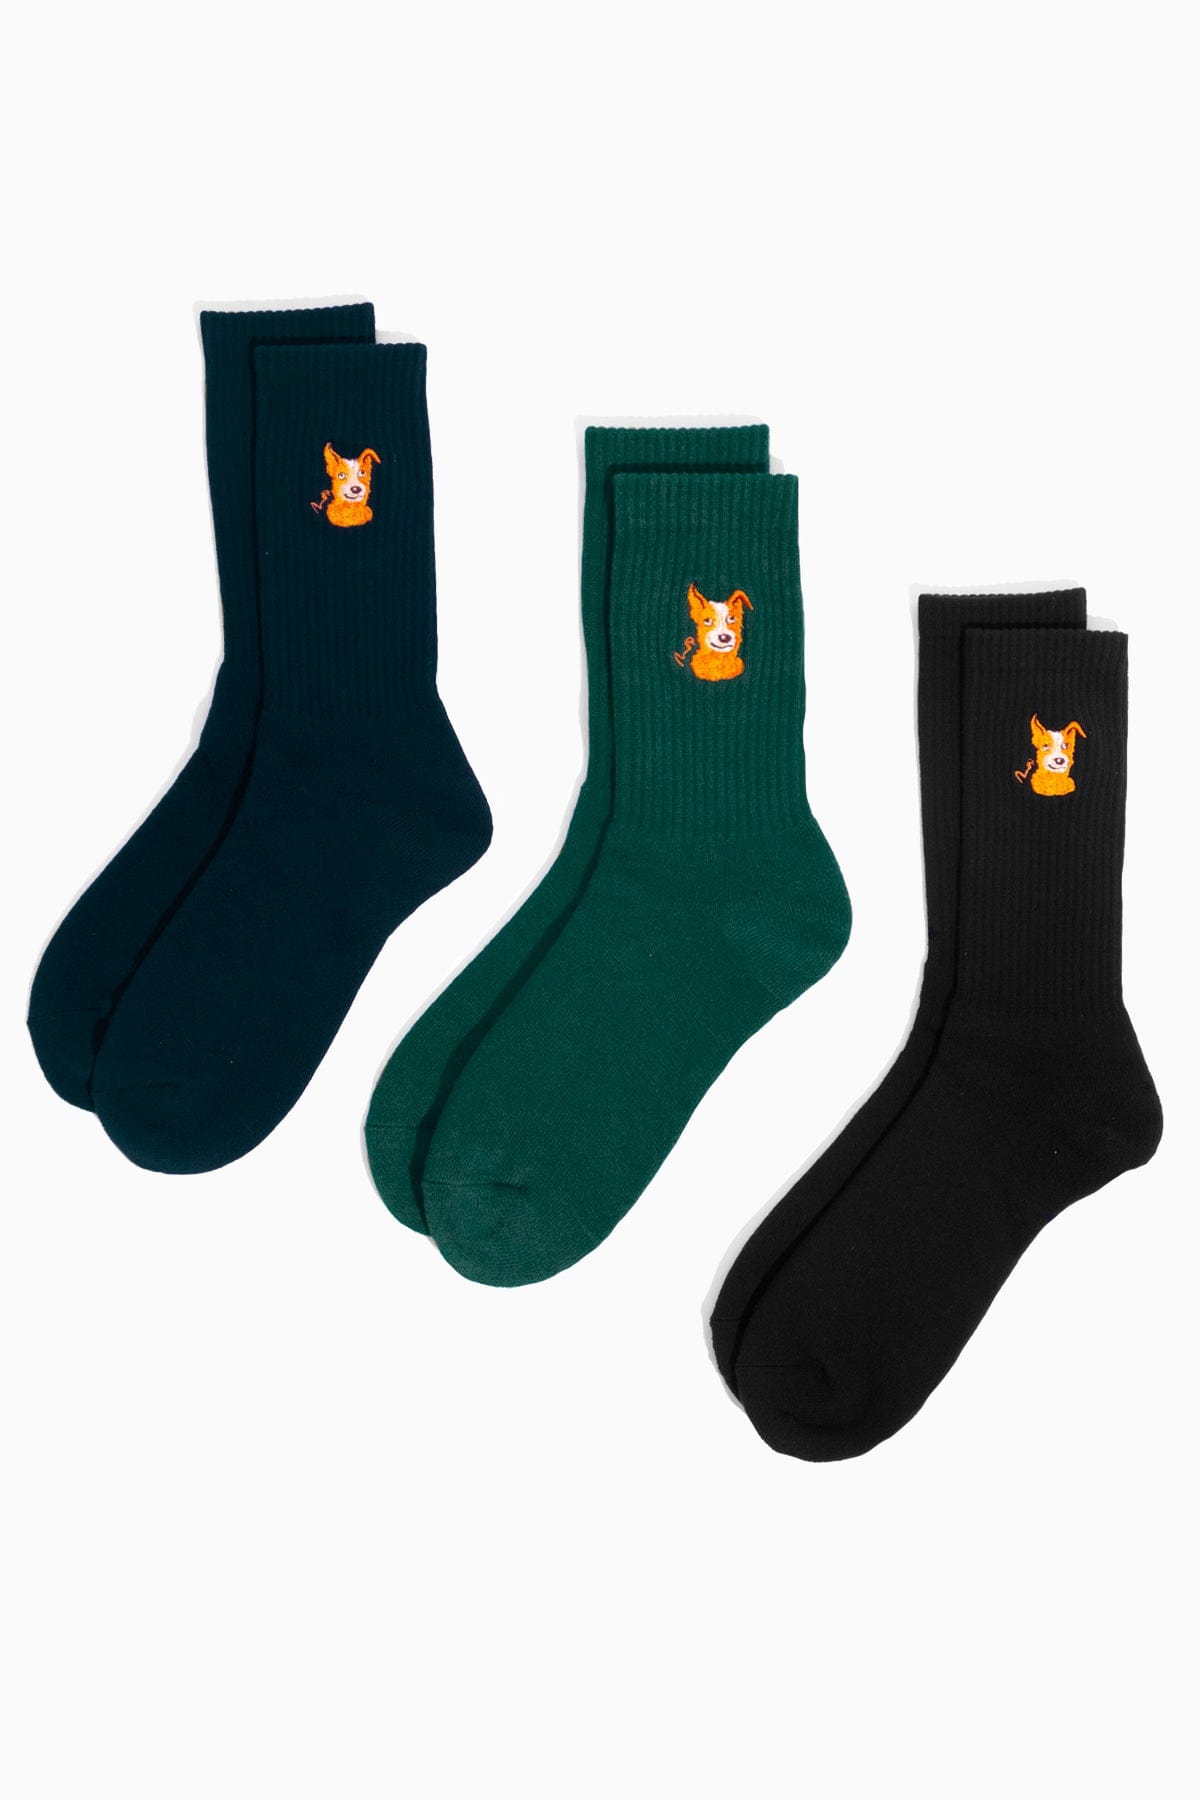 Swoopy Bois Crew Sock - 3 Pack